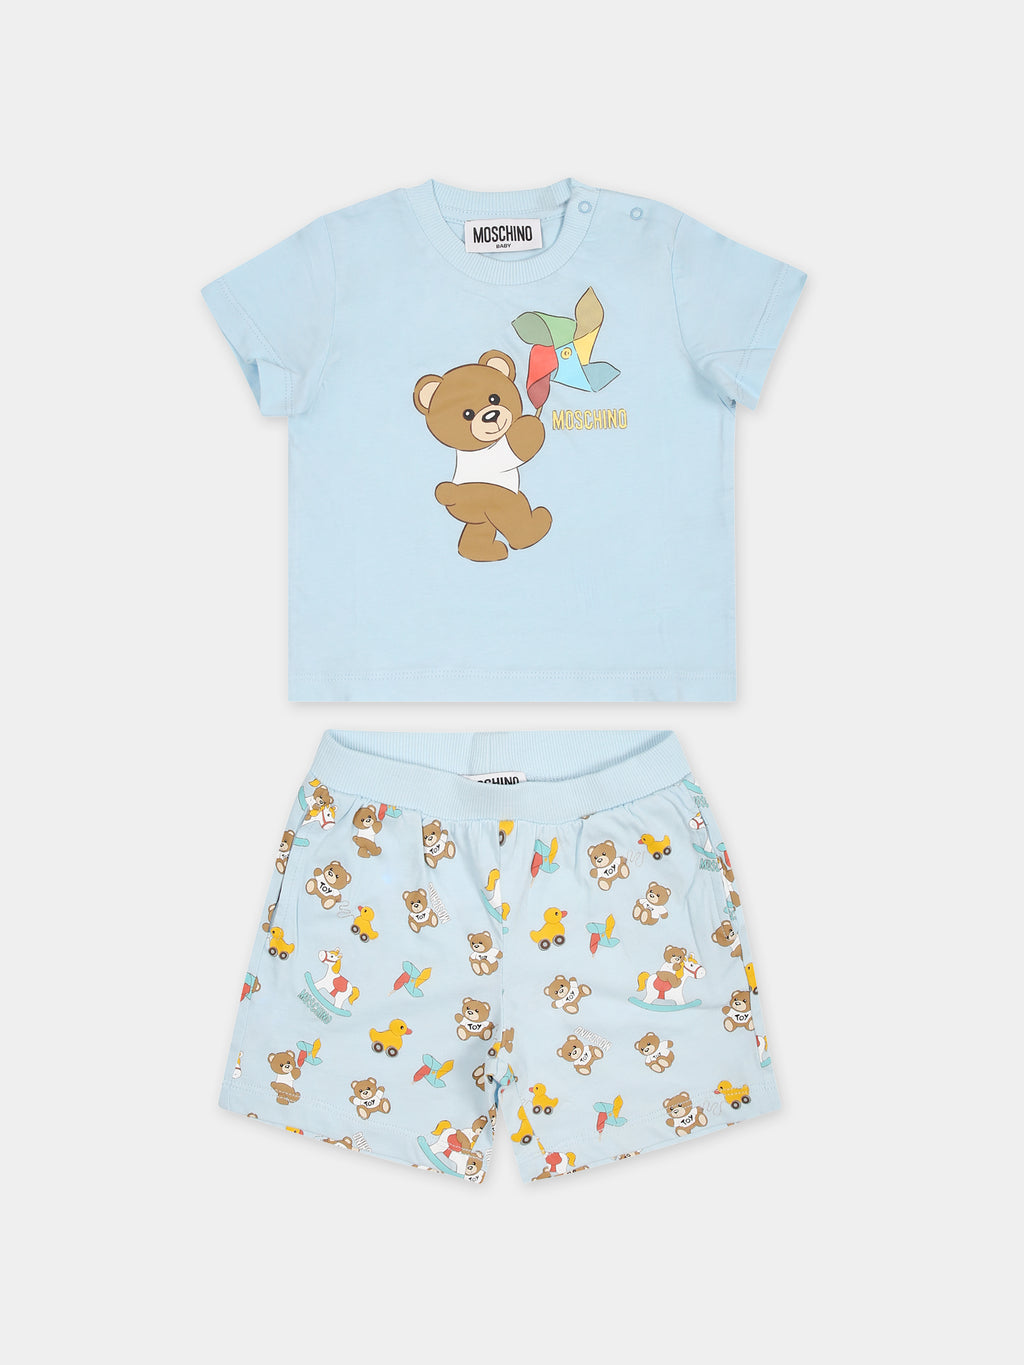 Light blue set for baby boy with Teddy Bear and pinwheel